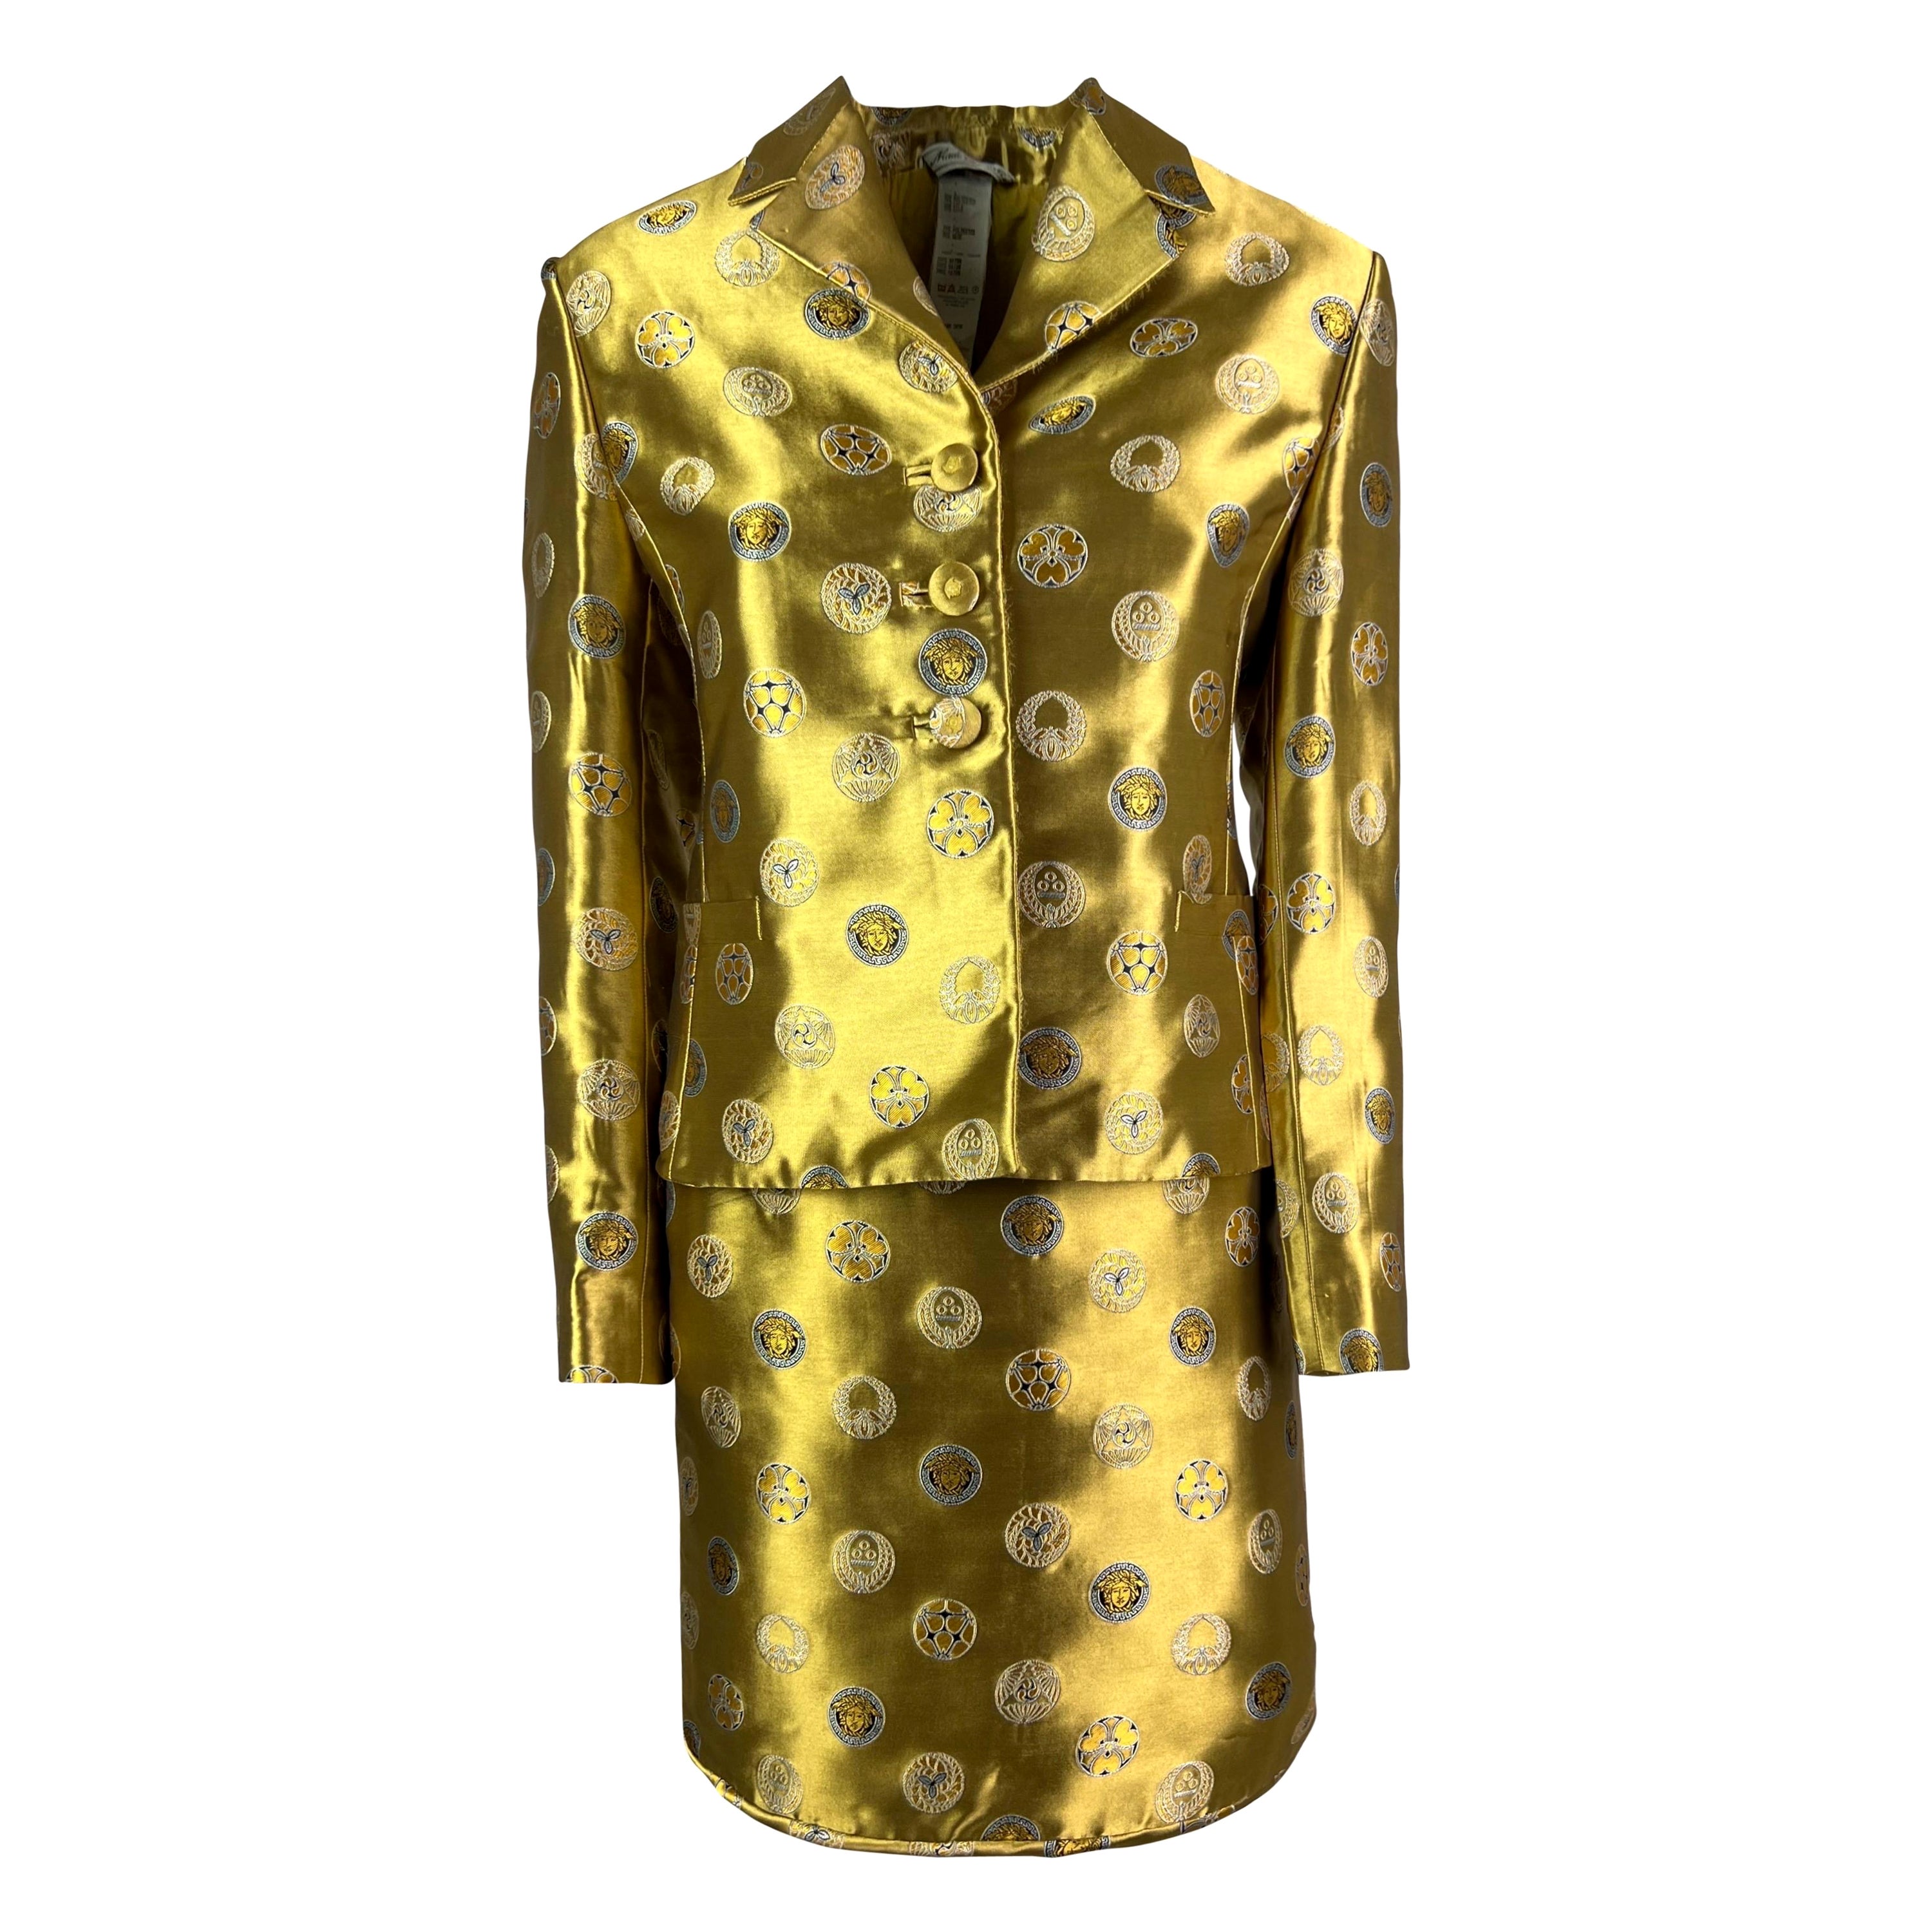 Fall 1997  Gianni Versace Golden Coin Print Suit For Sale